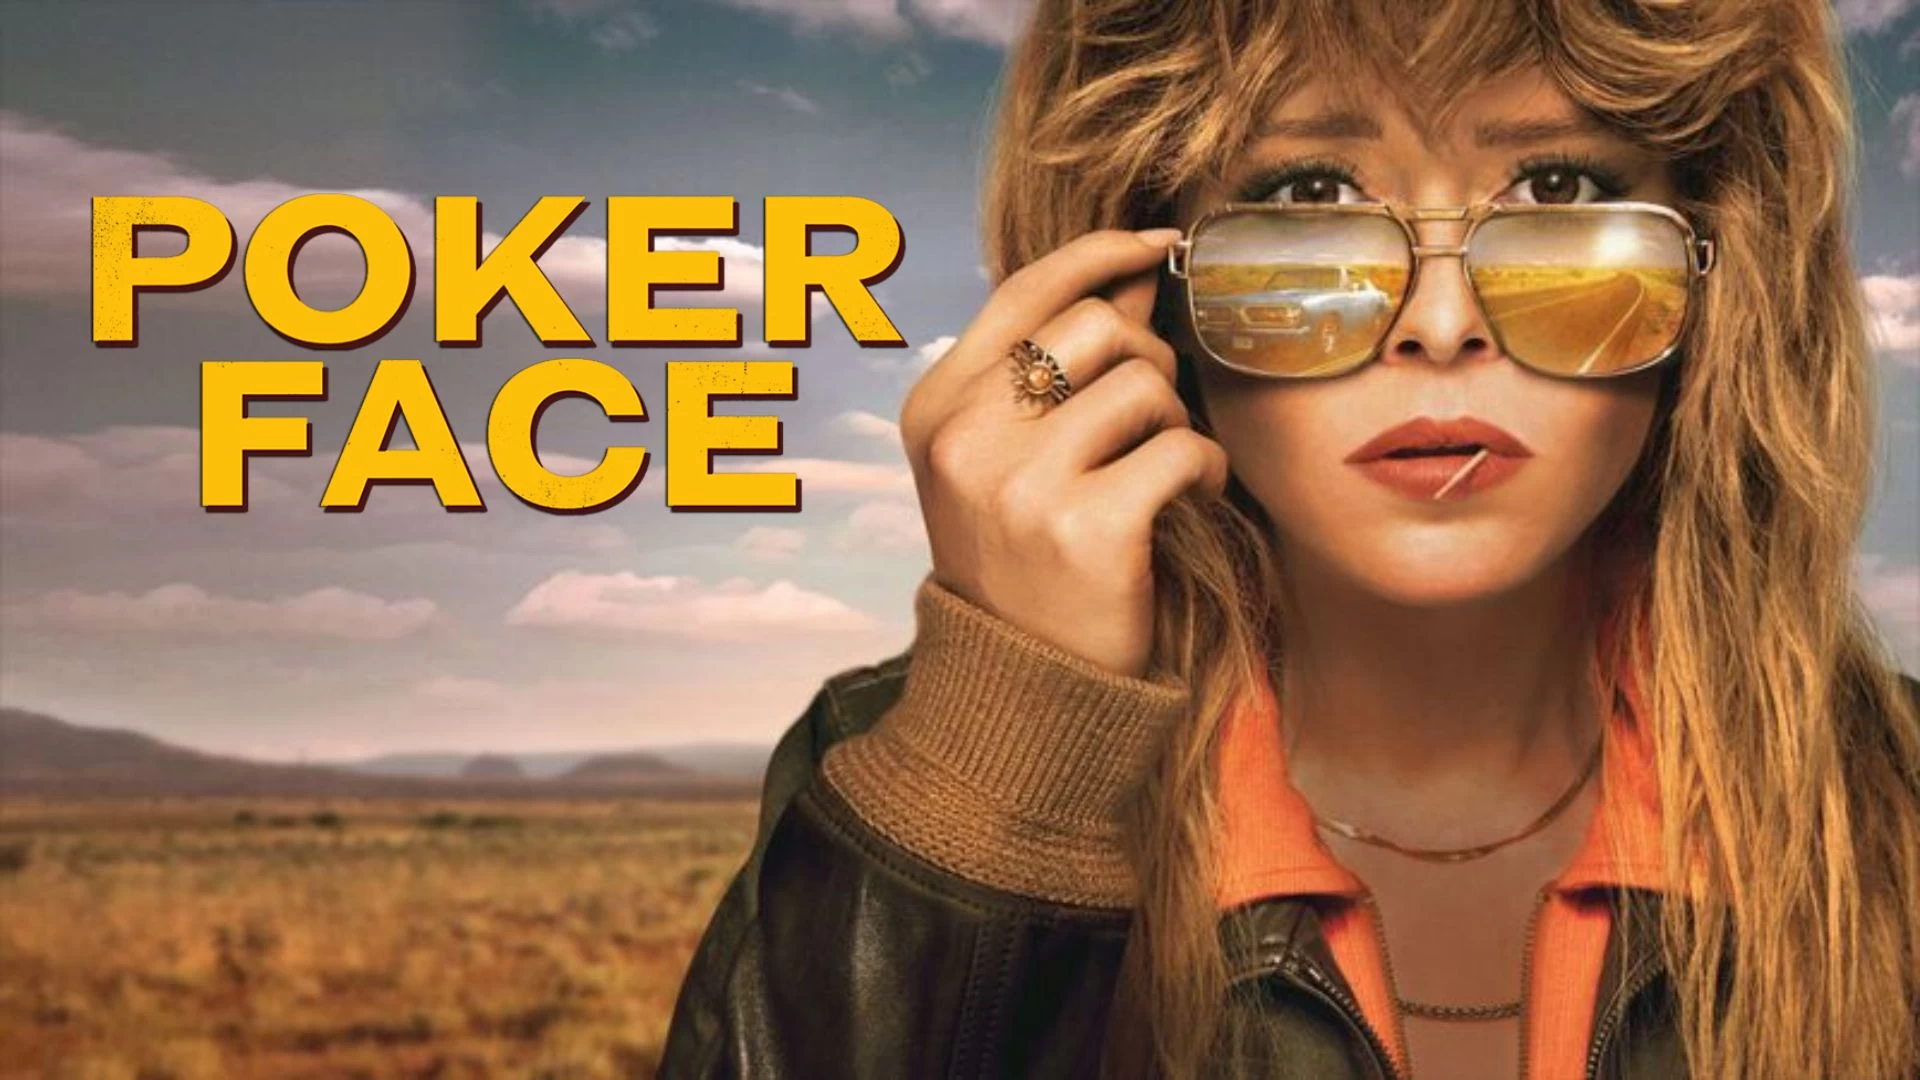 Will There Be a Poker Face Season 2? Poker Face Season 2 Release Date, Cast and More